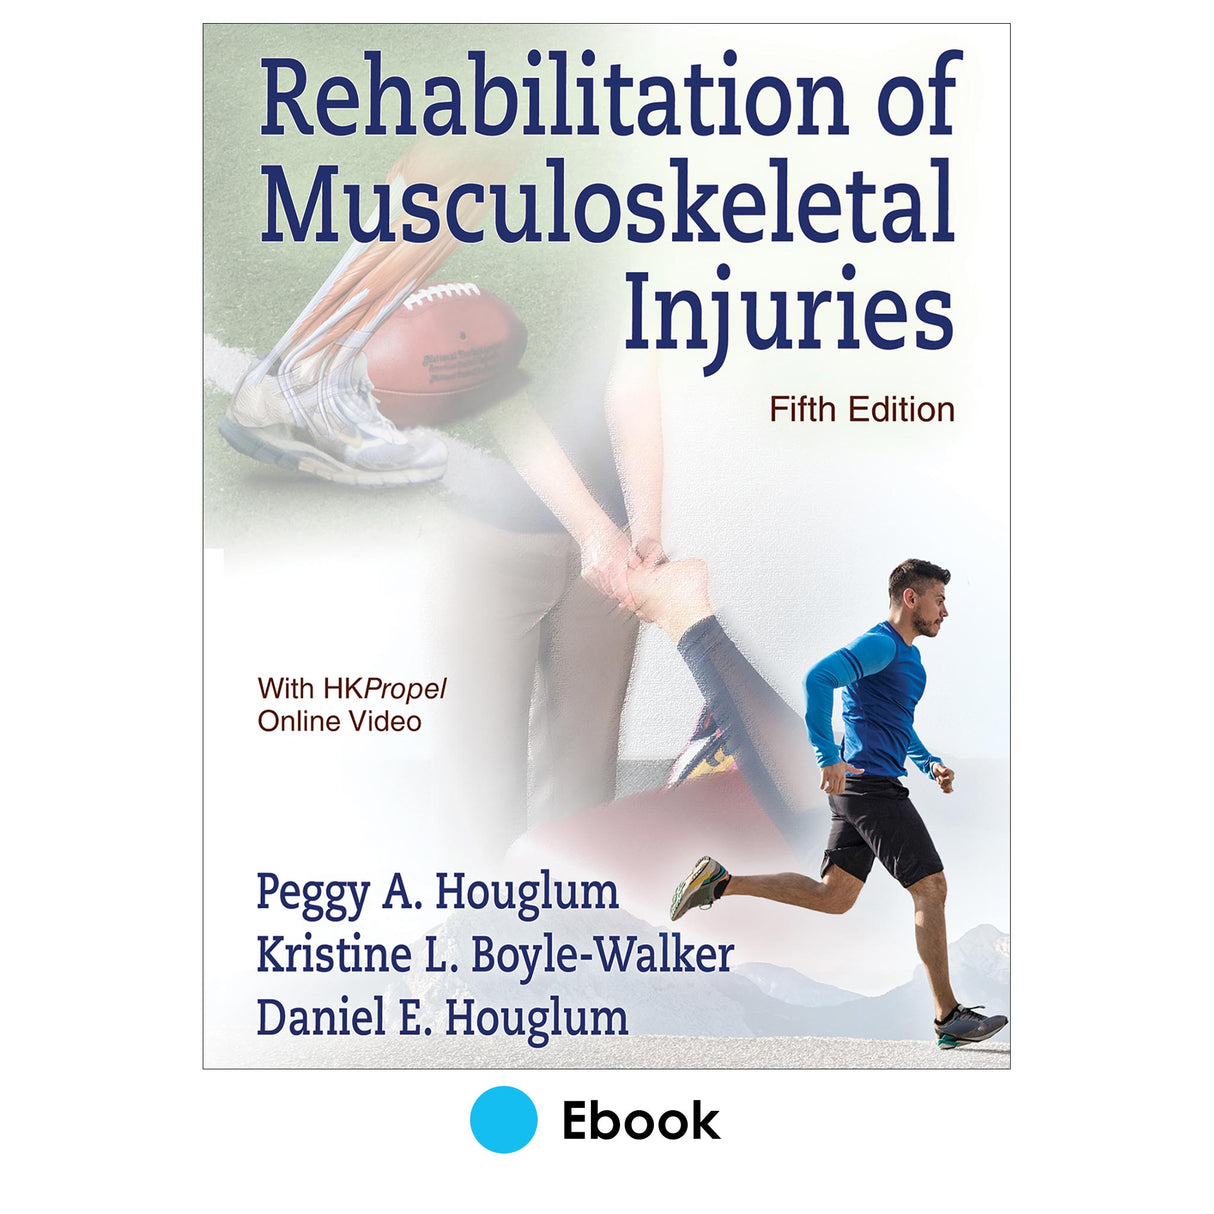 Rehabilitation of Musculoskeletal Injuries 5th Edition Ebook With HKPropel Online Video